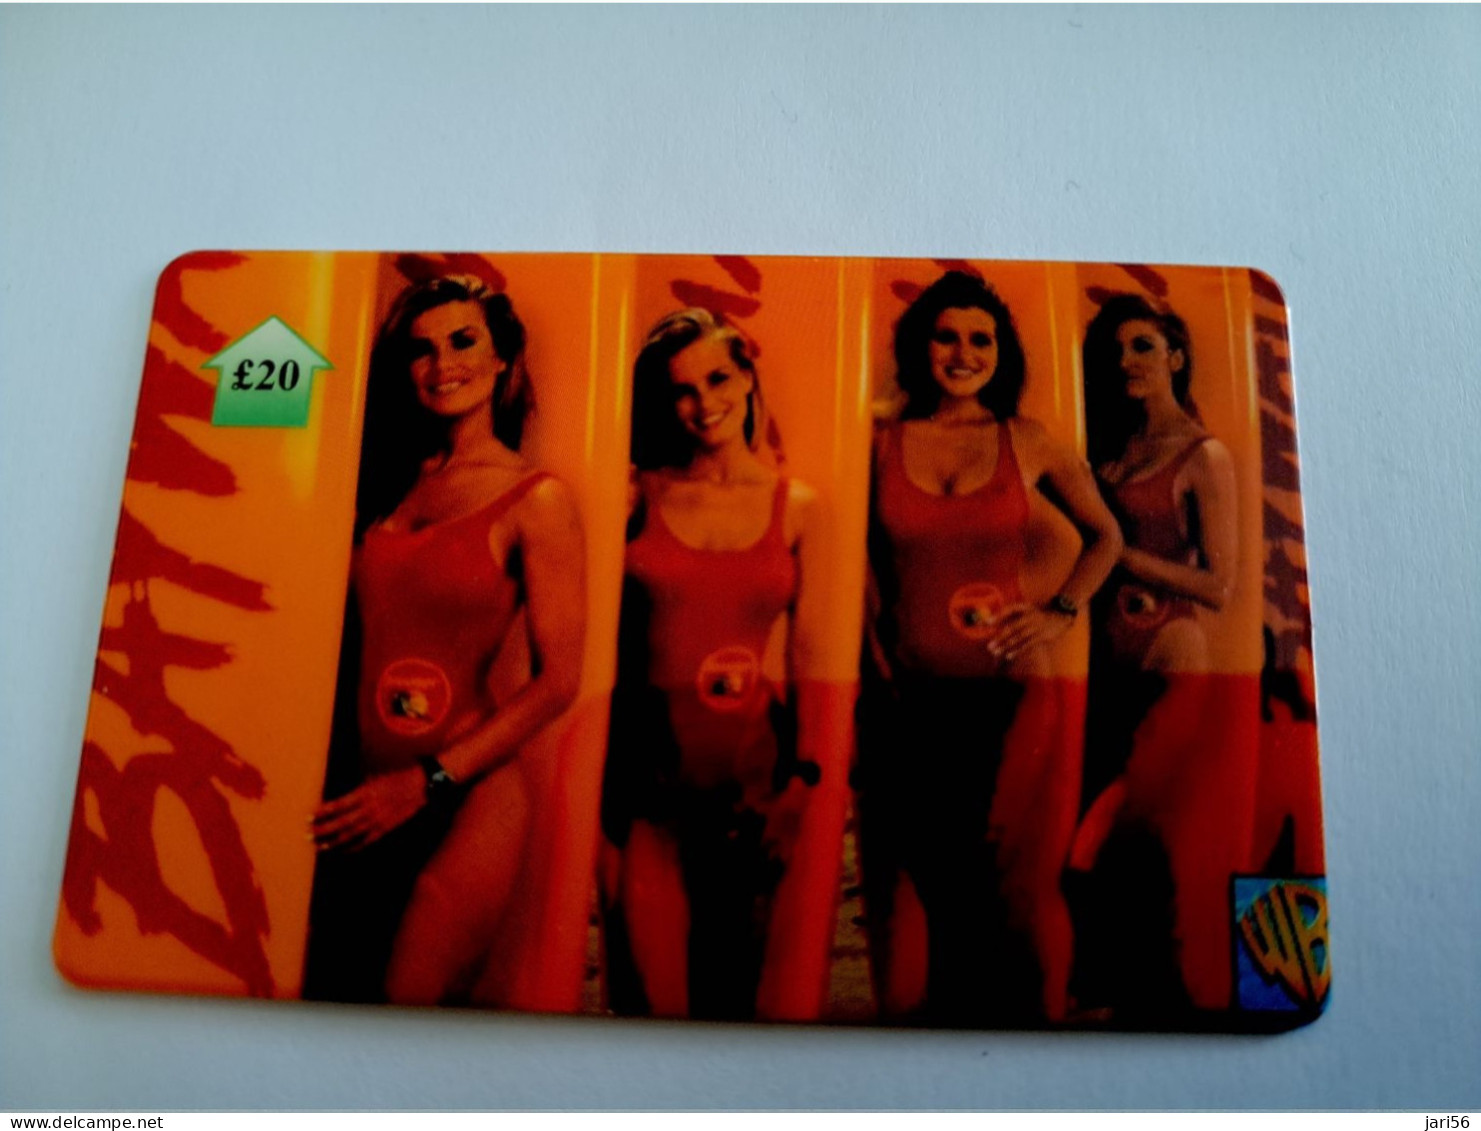 GREAT BRITAIN / 20 POUND /MAGSTRIPE  / BAYWATCH PHONECARD/ LIMITED EDITION/ ONLY 500 EX     **15684** - [10] Colecciones